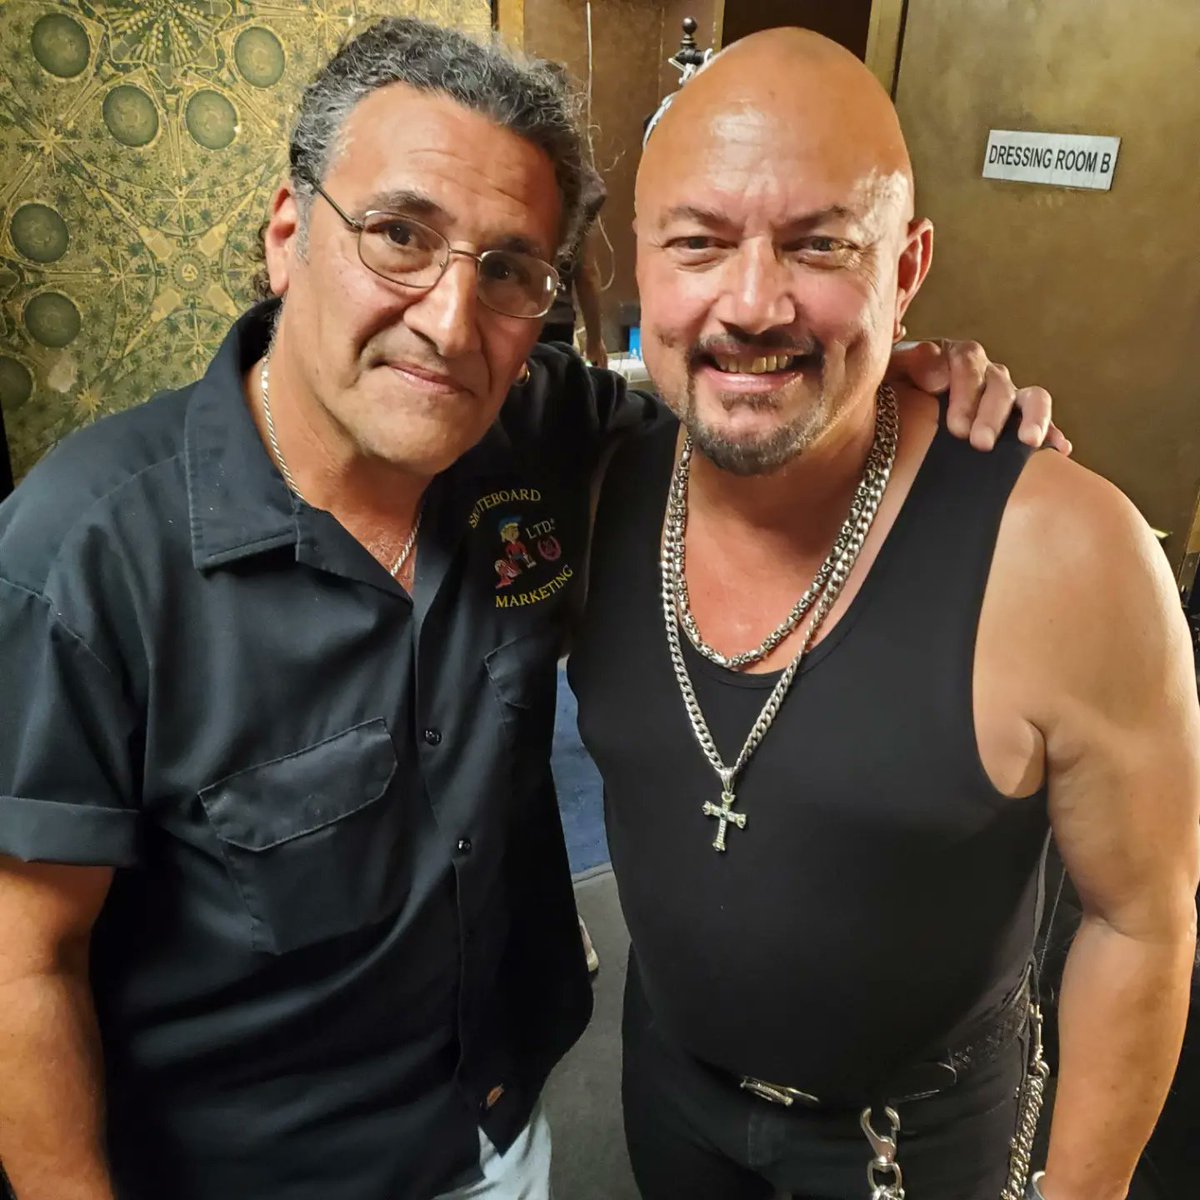 Having a little pre show hang time with @geofftate @SonyHall for #thebigrockshow the band was tight live with 3 guitar players. #munseyricci #geofftate #metalcontraband #metal